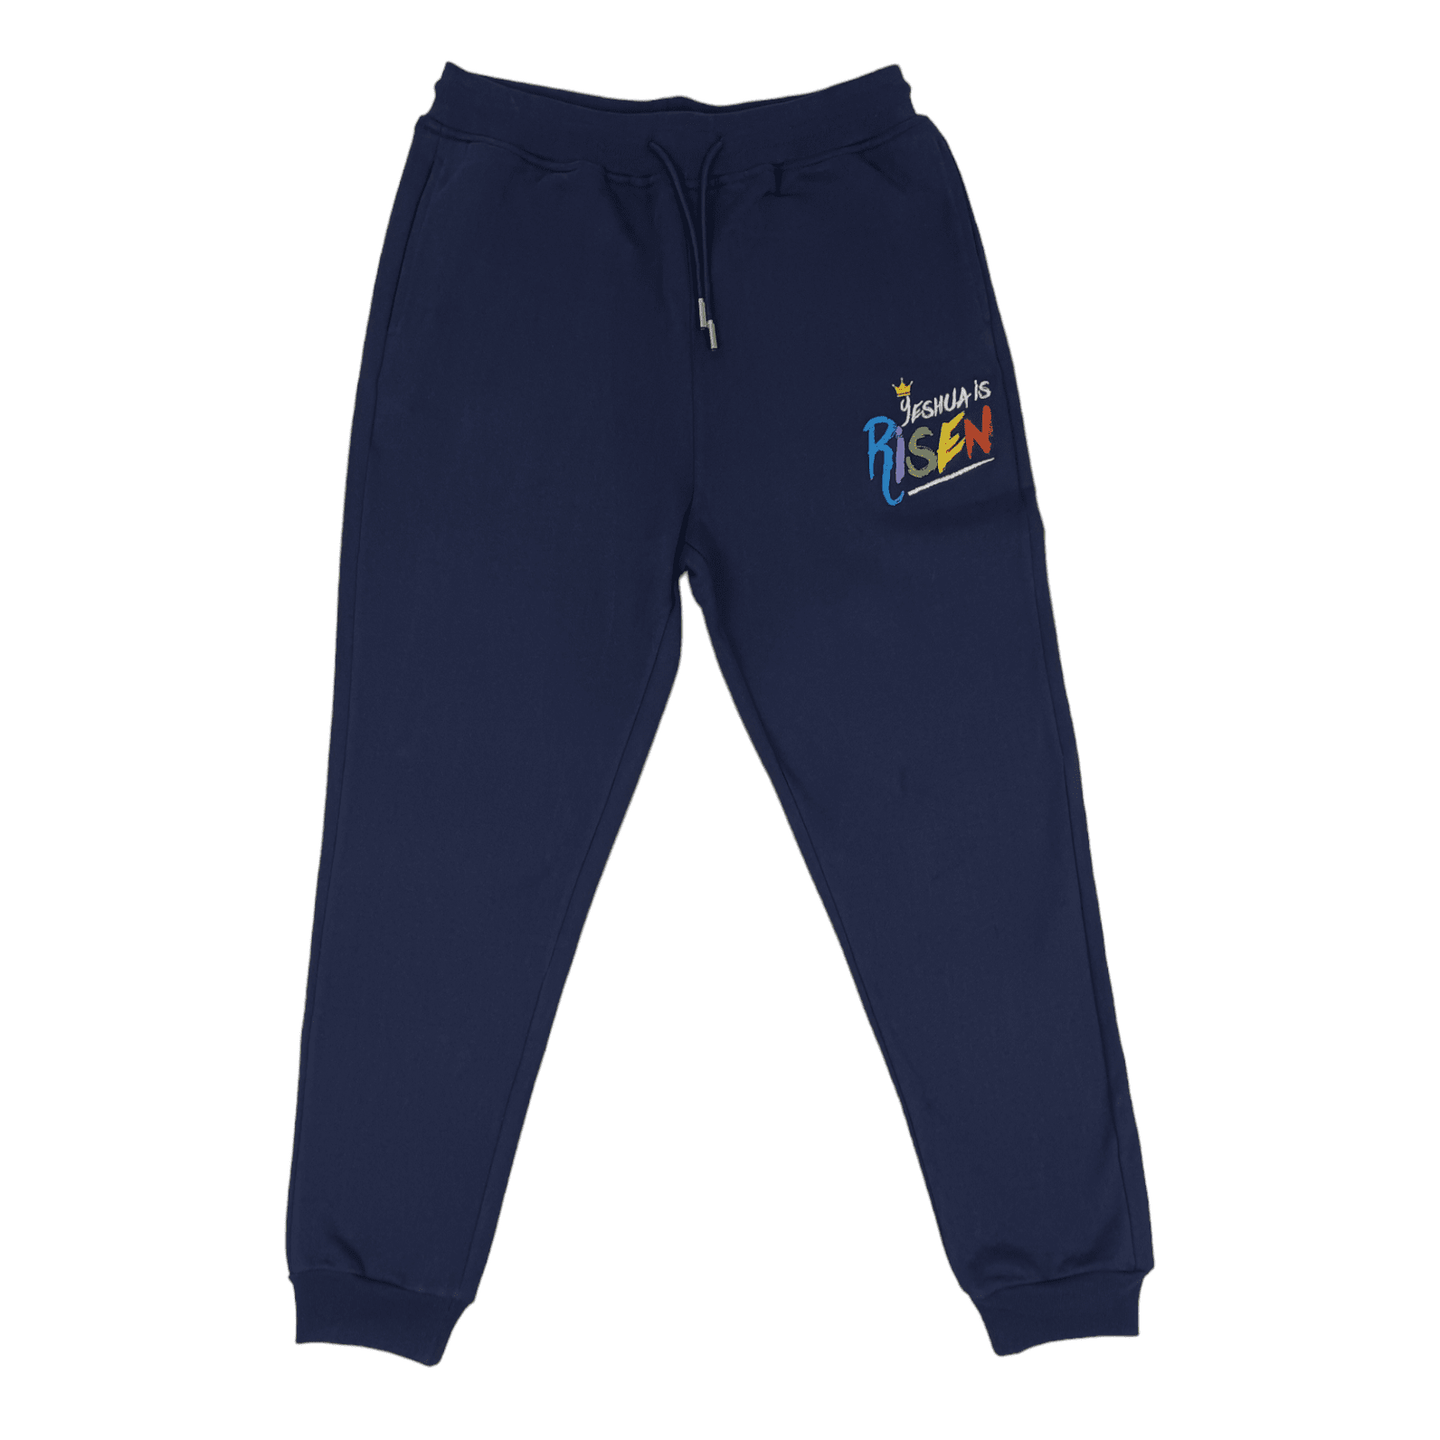 YESUA IS RISEN Embroidered Jogger pants